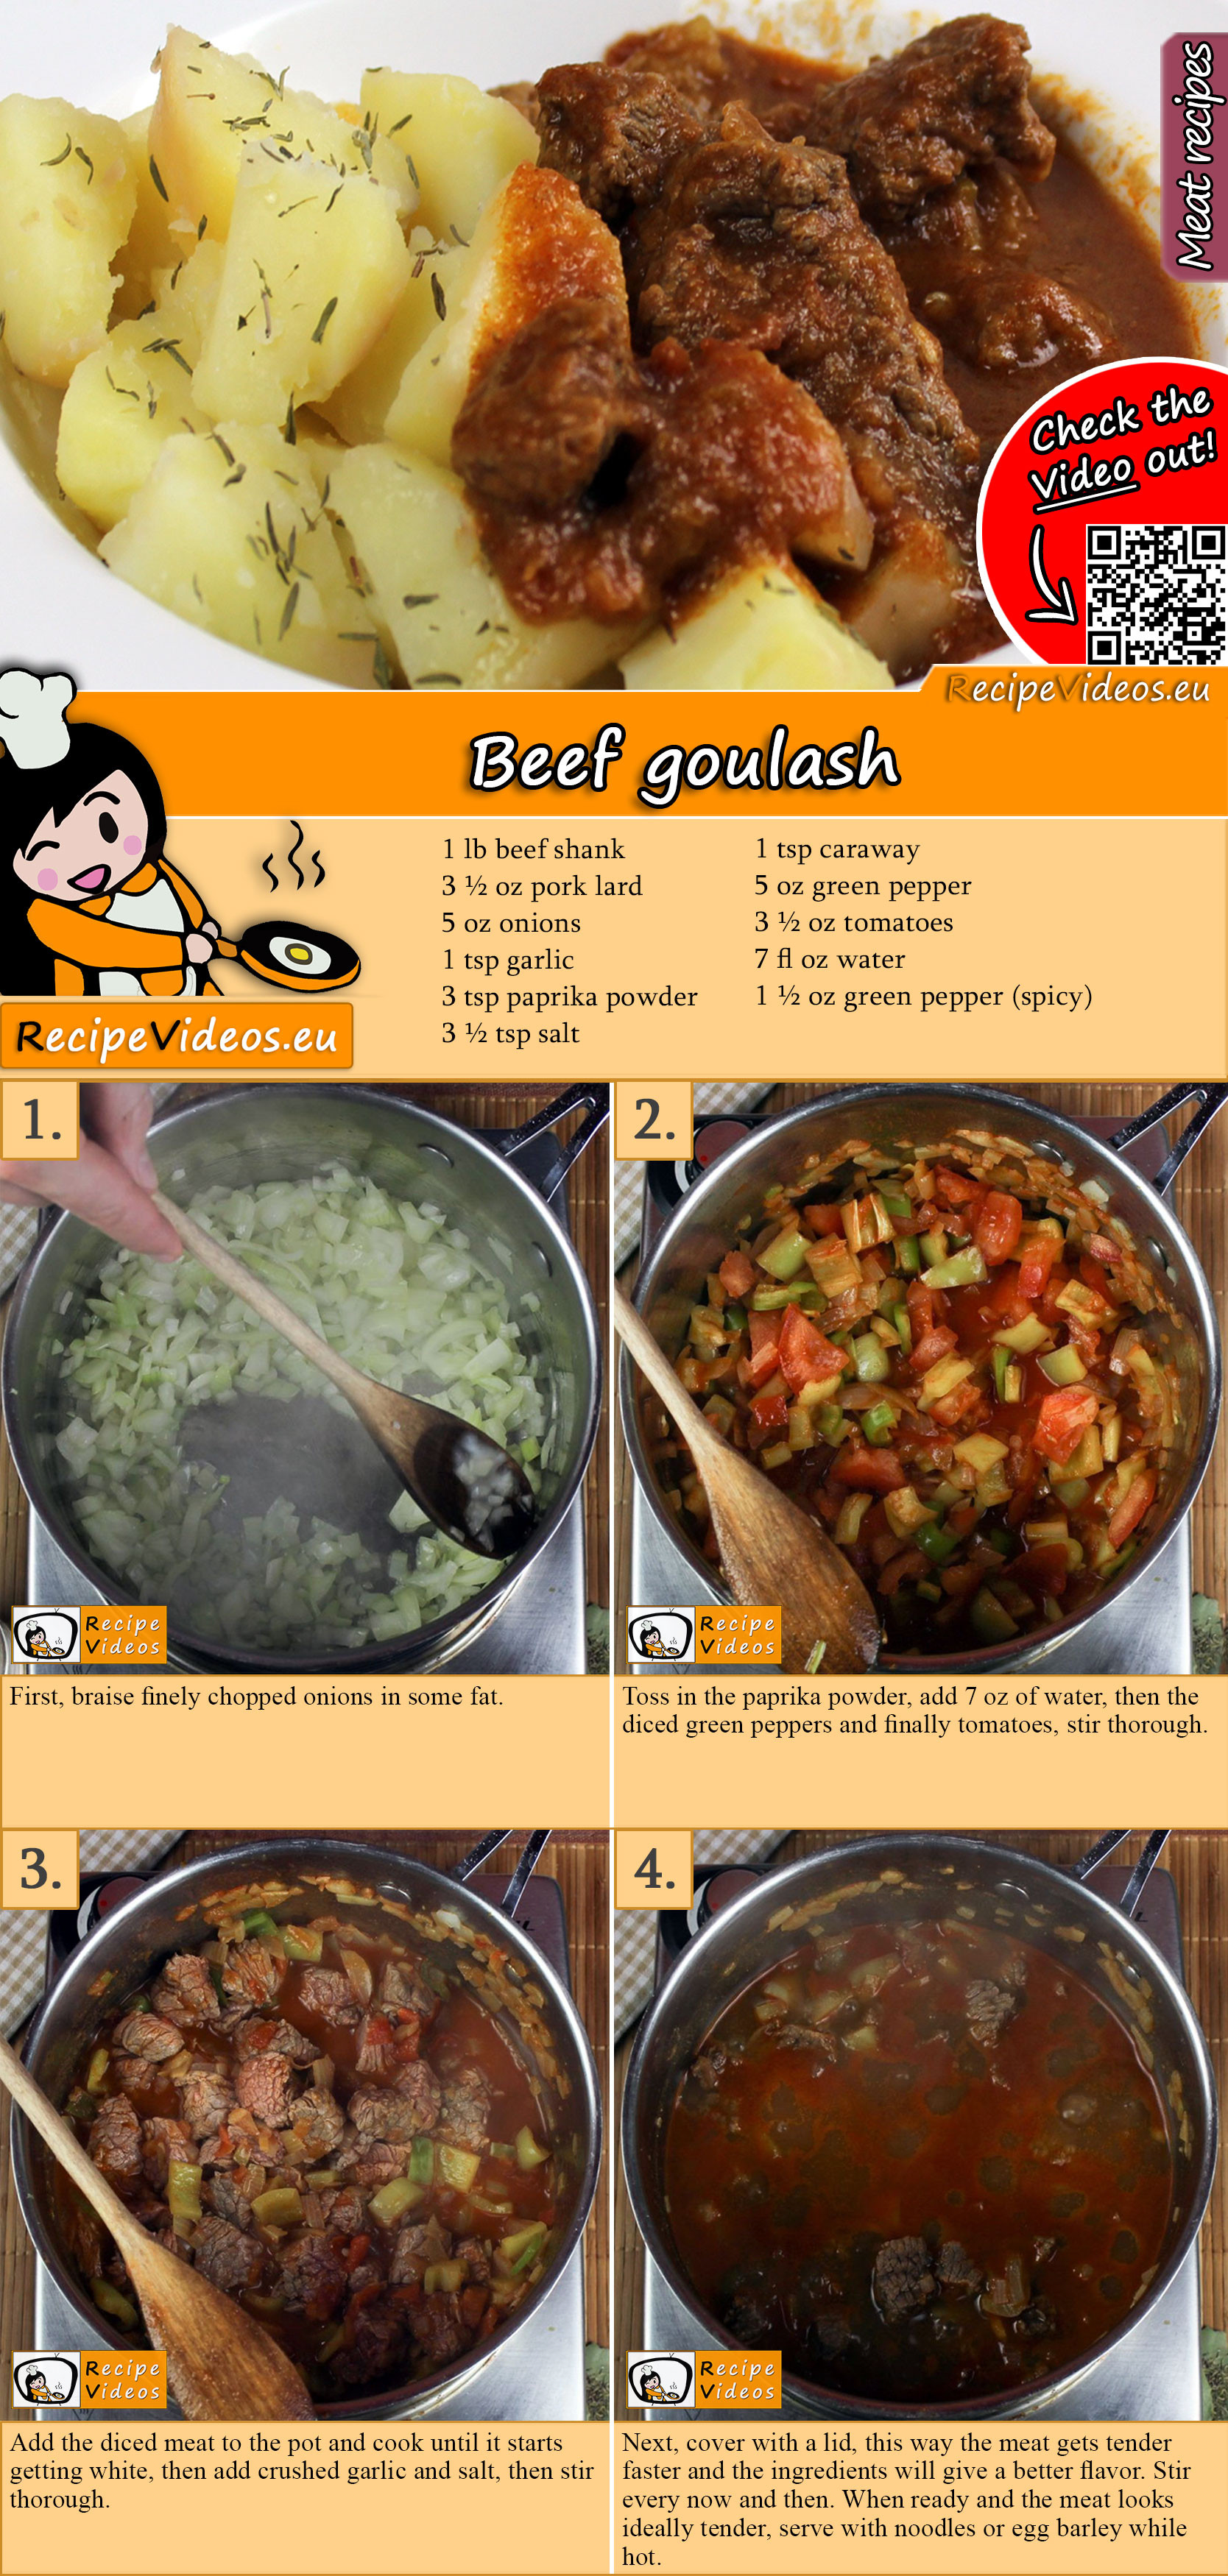 Beef goulash recipe with video